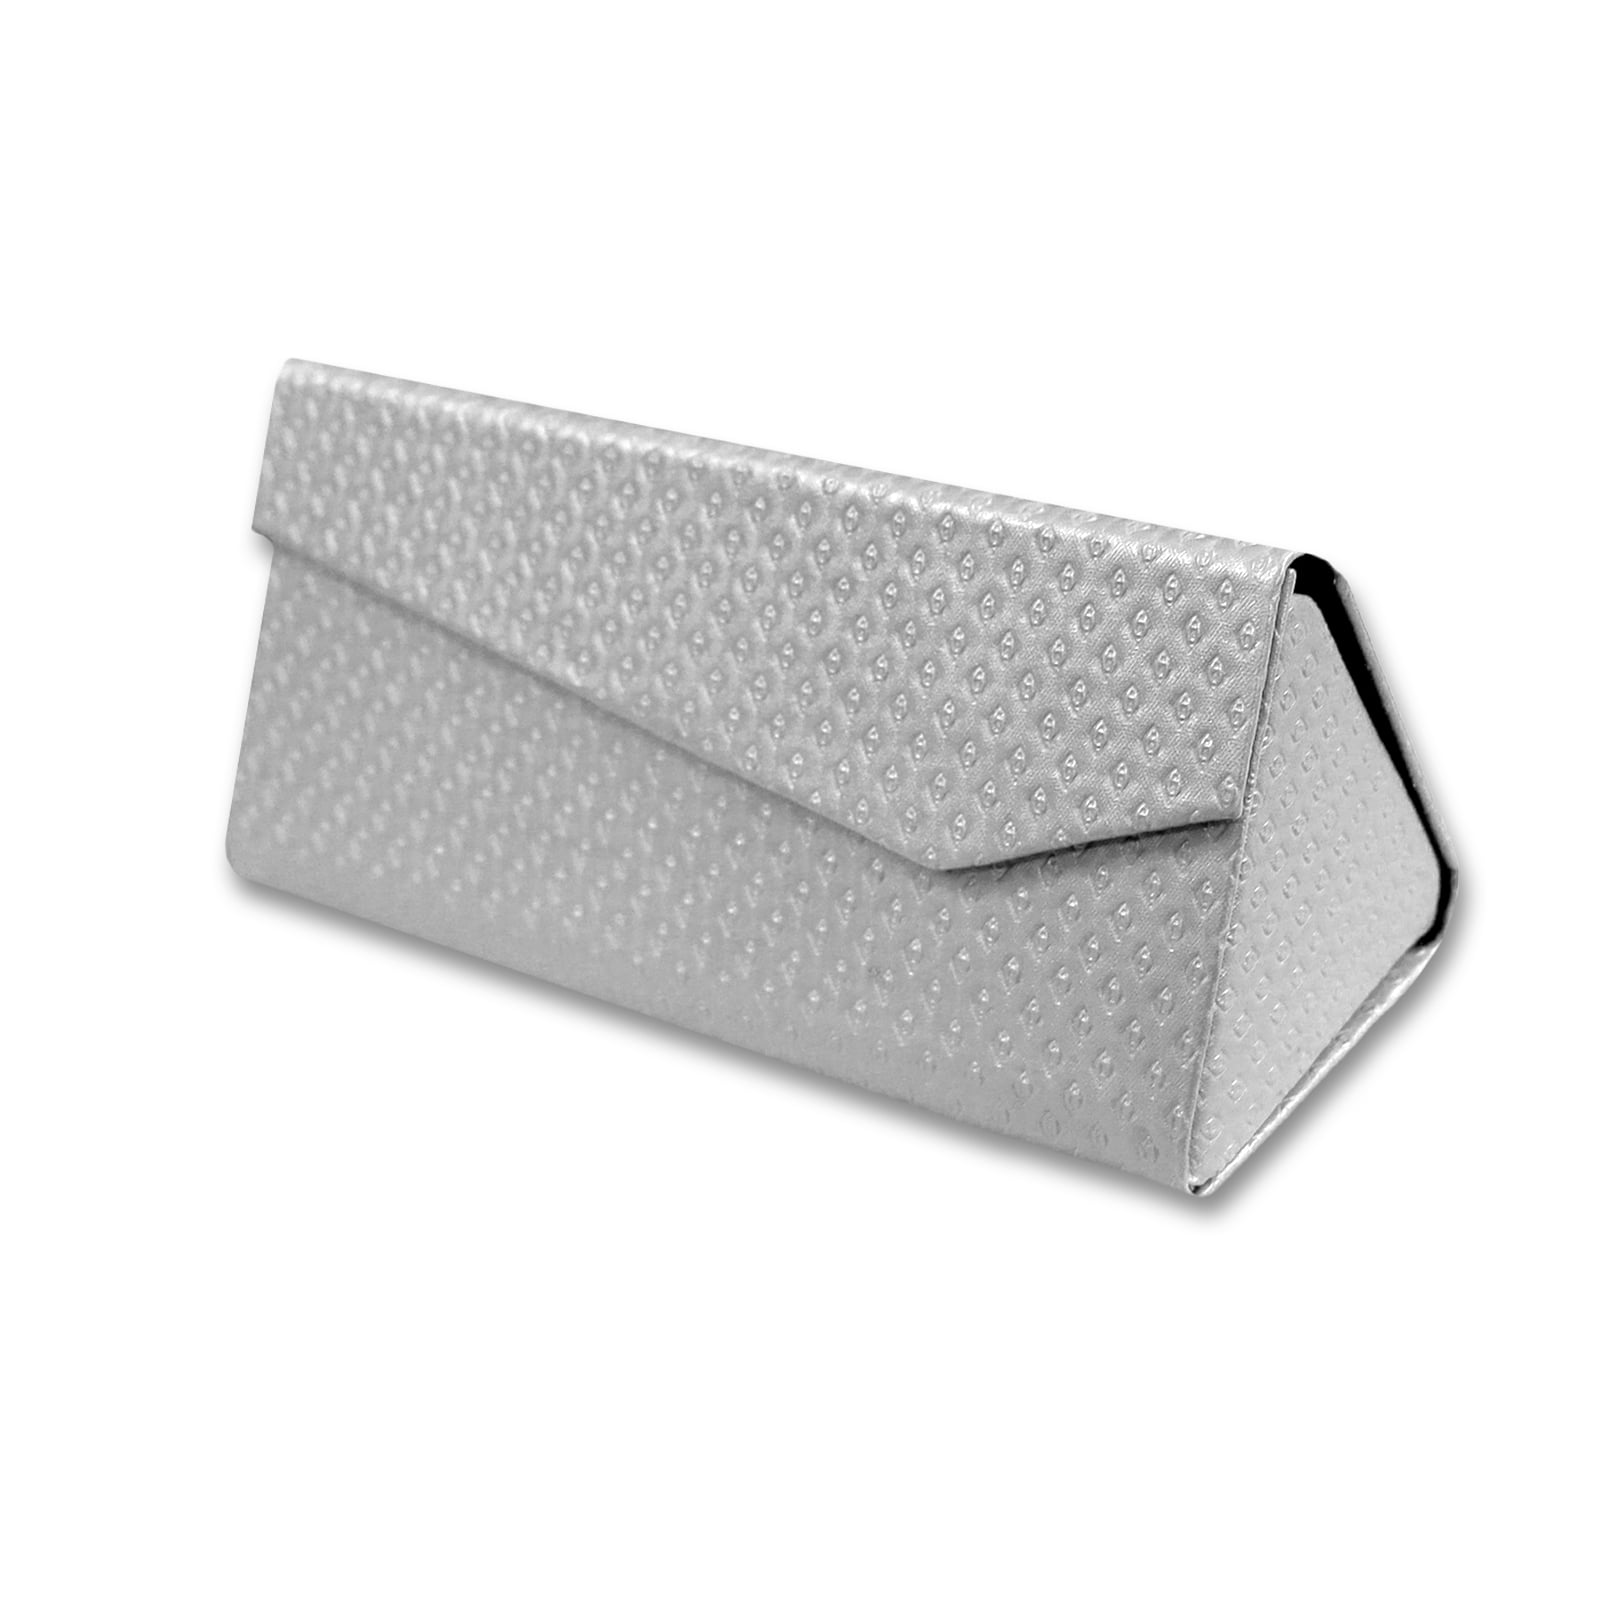 foldable and lightweight glasses case Triangular Magnetic Clasp and Velvet Lined Interior 